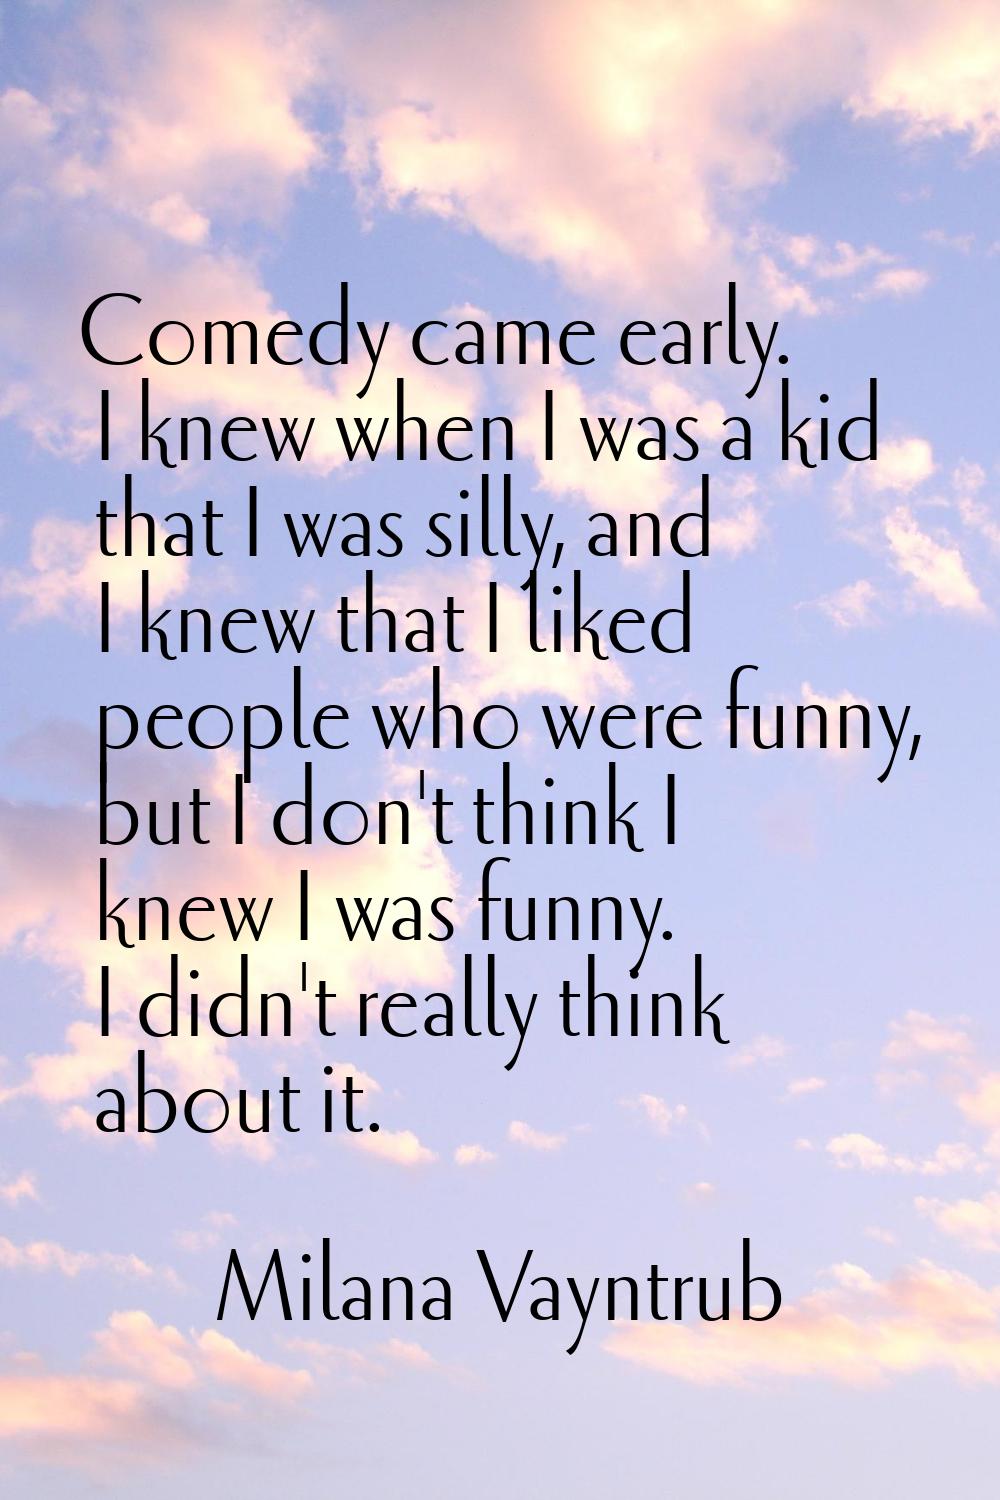 Comedy came early. I knew when I was a kid that I was silly, and I knew that I liked people who wer